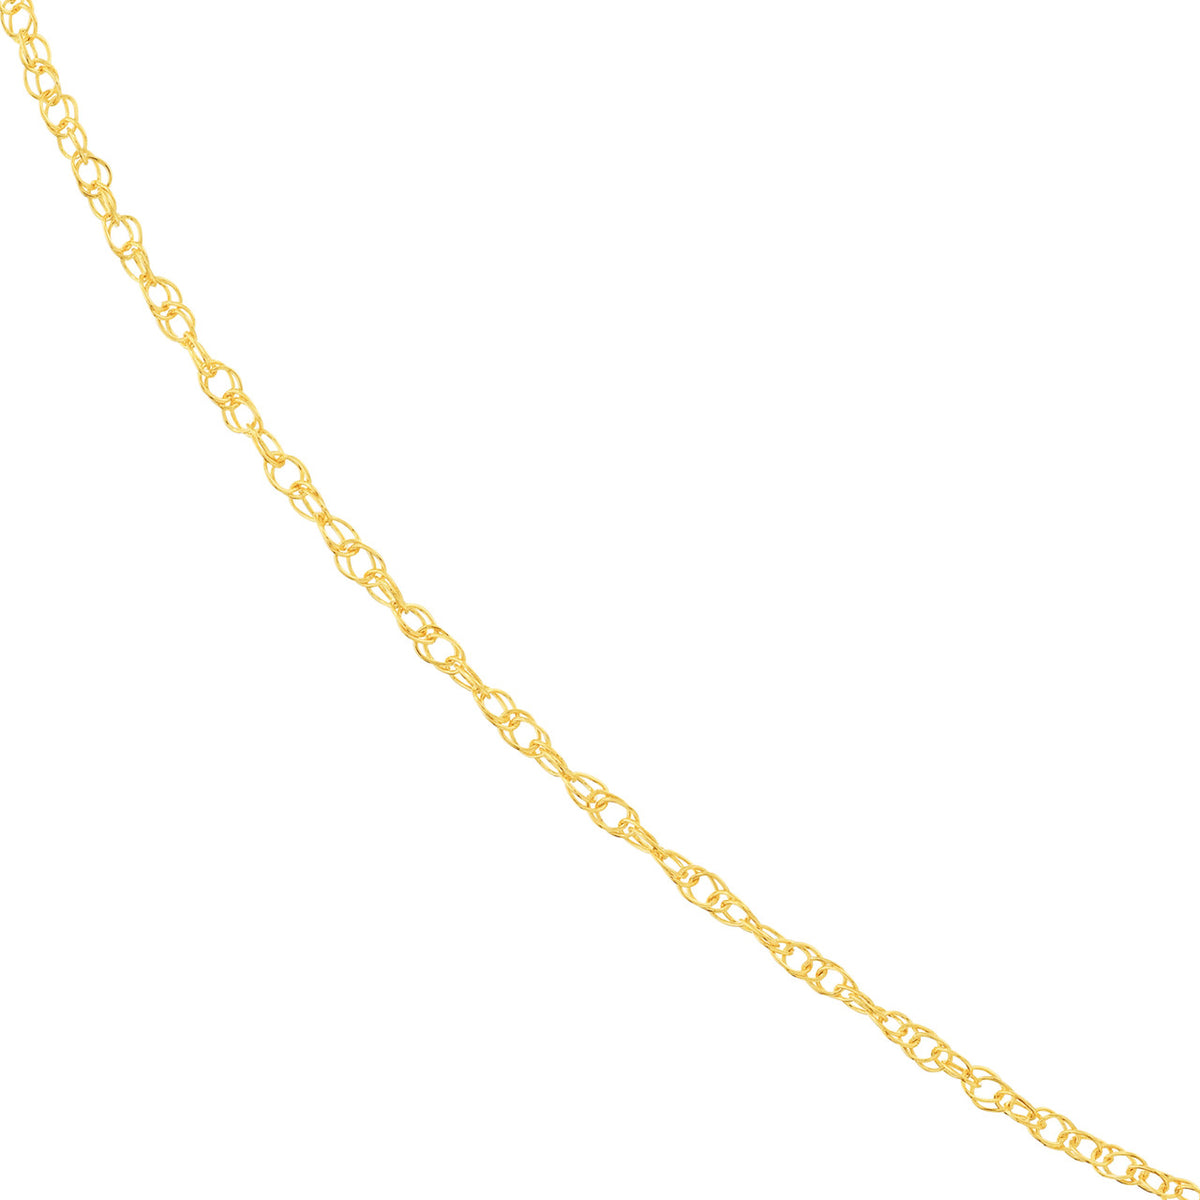 14K Yellow Gold Or White Gold 1.2mm Adjustable Pendant Rope Chain Necklace with Lobster Lock